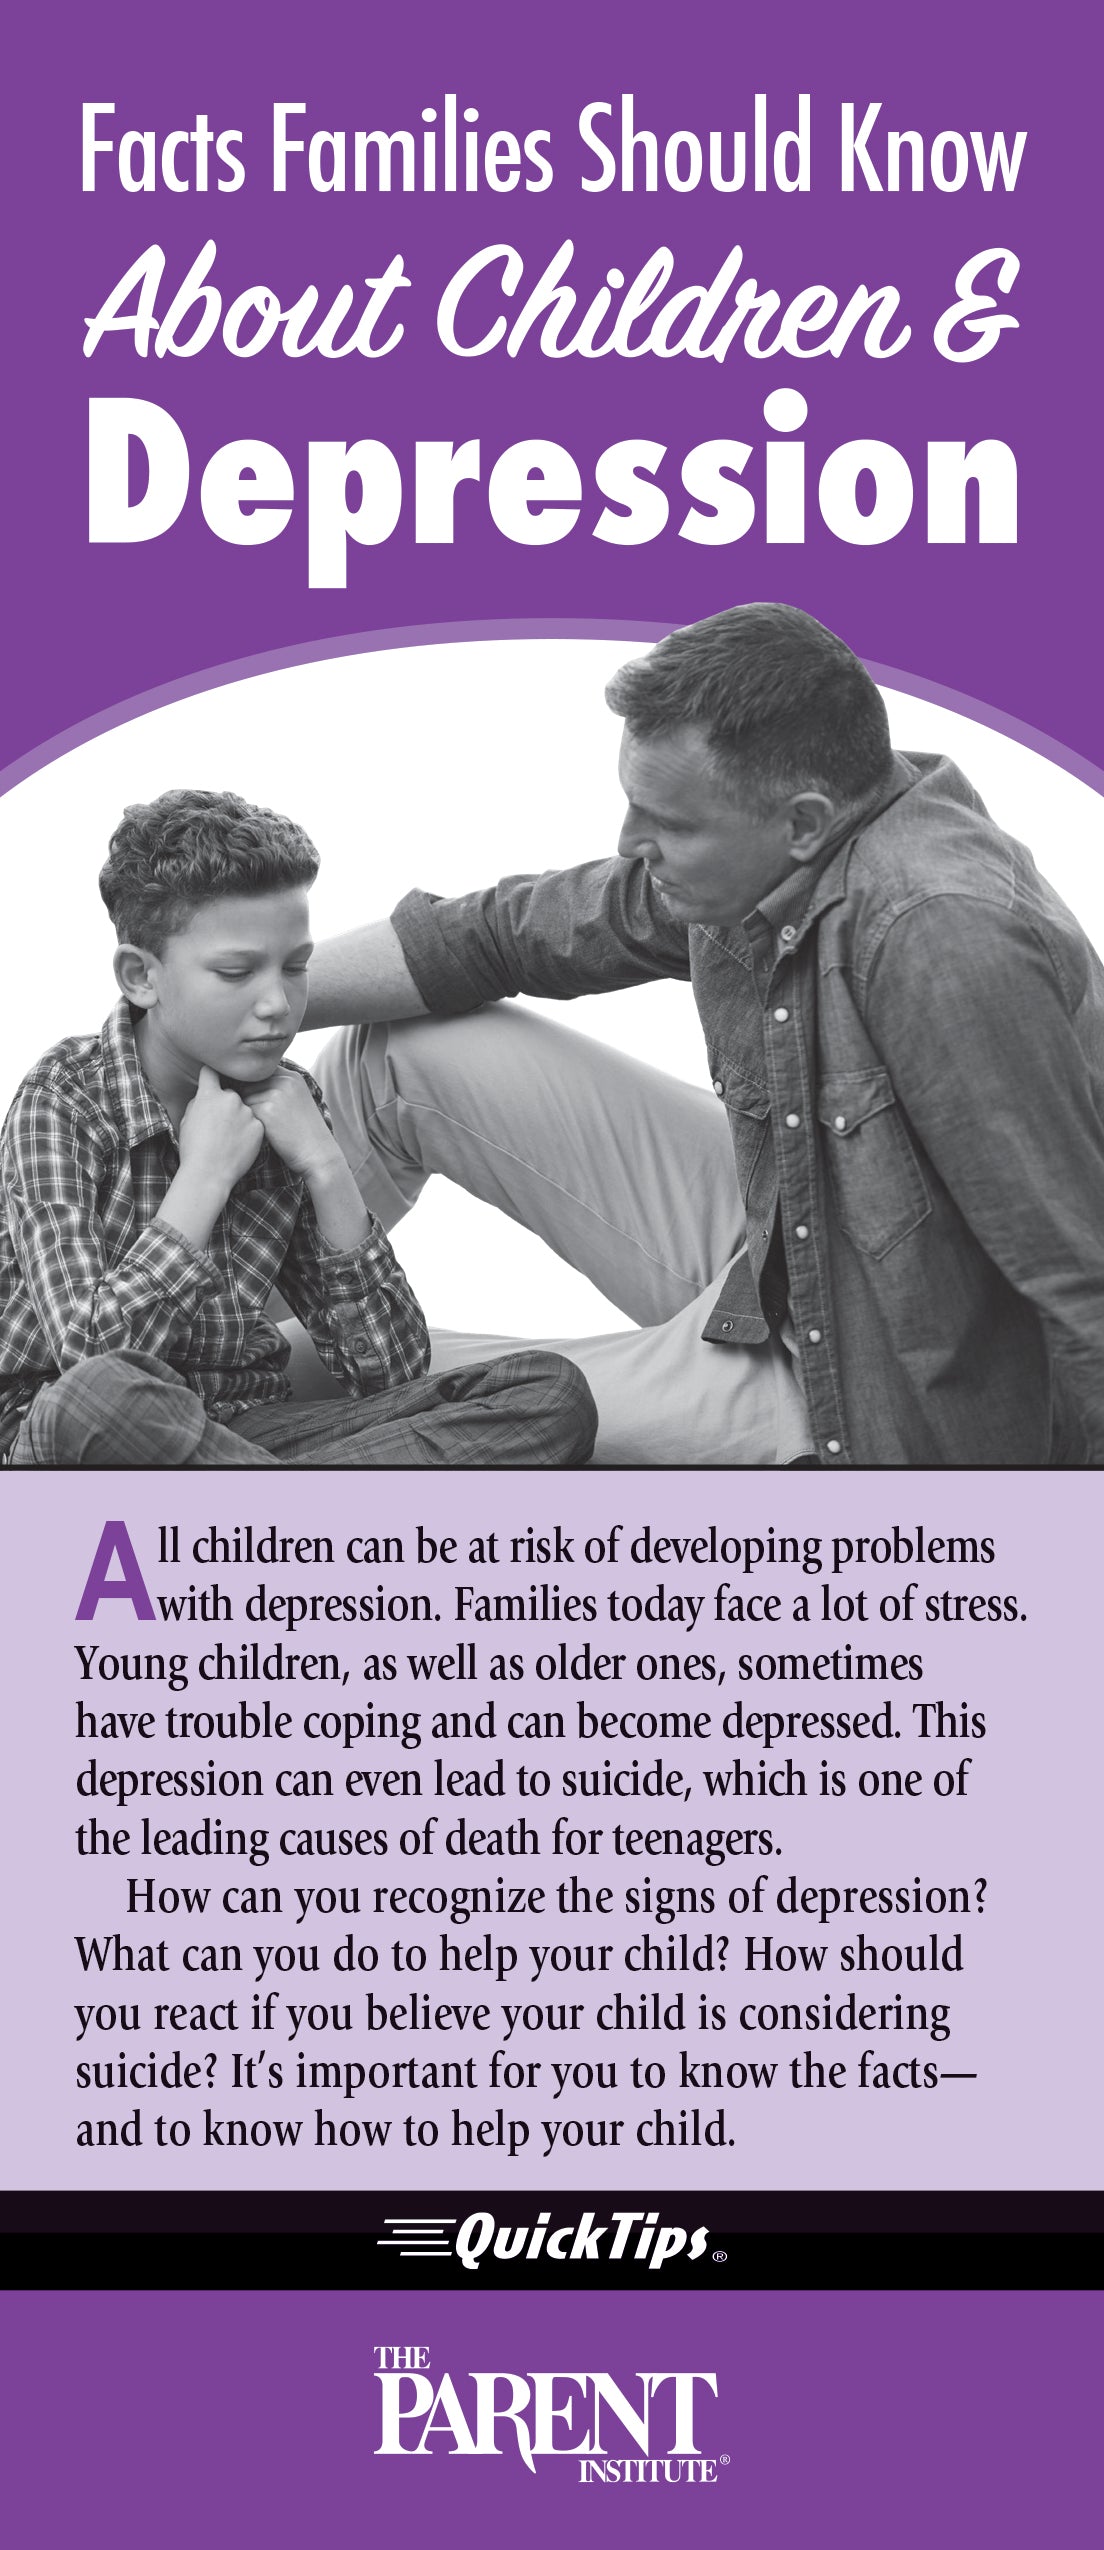 Facts Families Should Know About Children and Depression